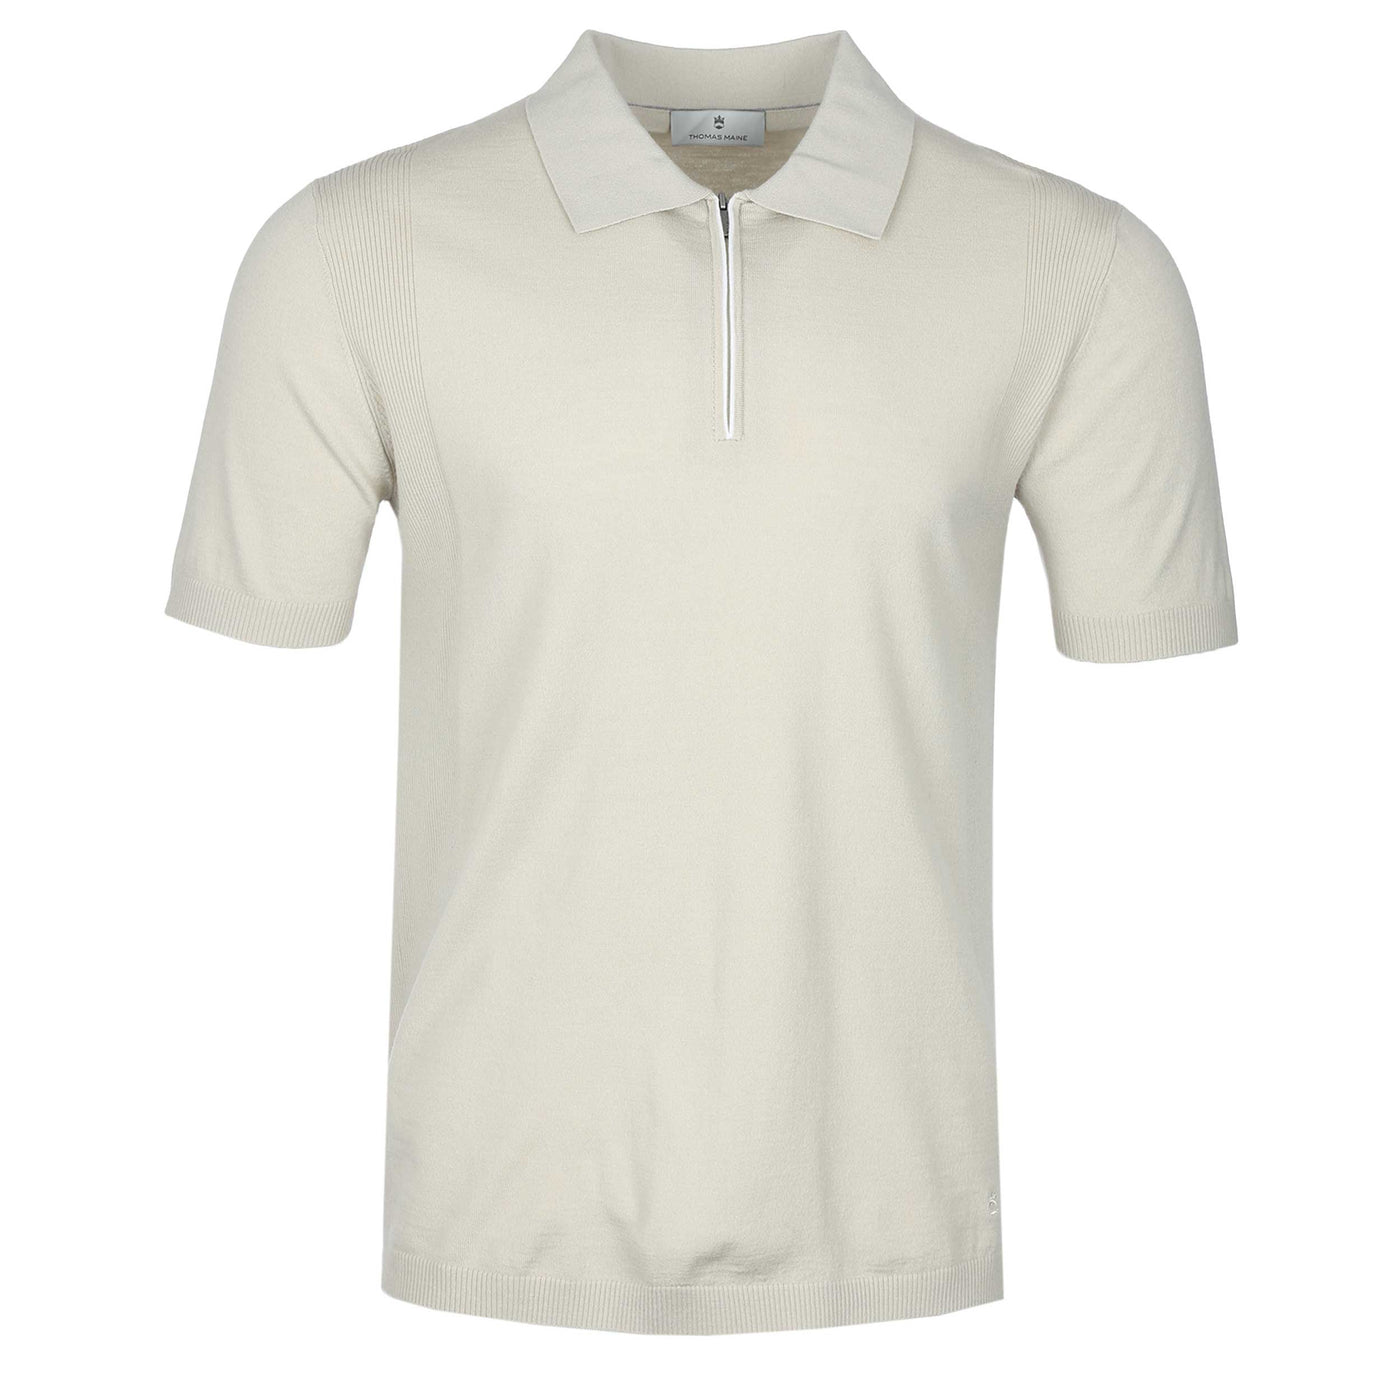 Thomas Maine Knitted Zip Polo Shirt in Beige